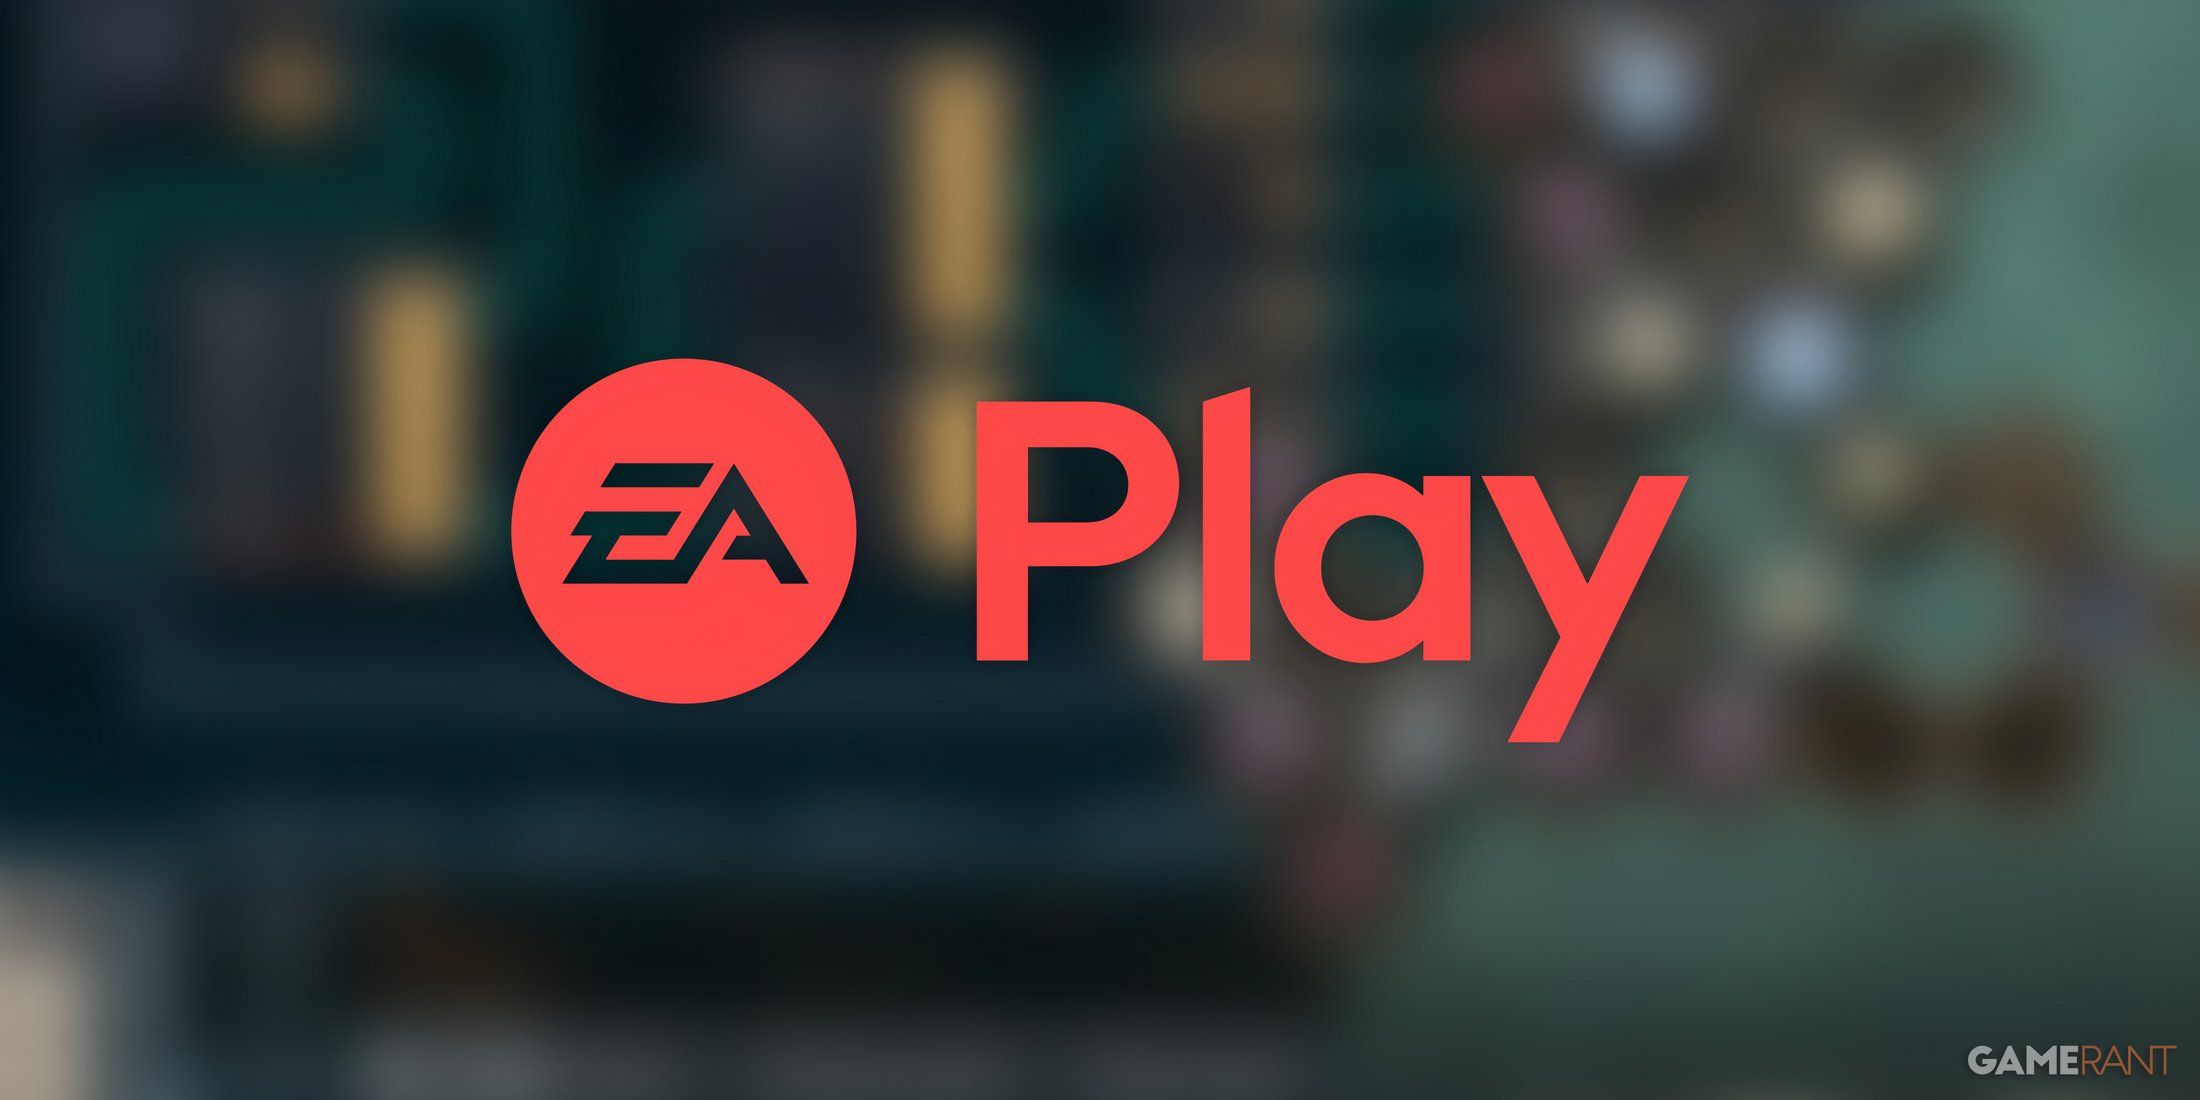 the logo for ea play subscription service.